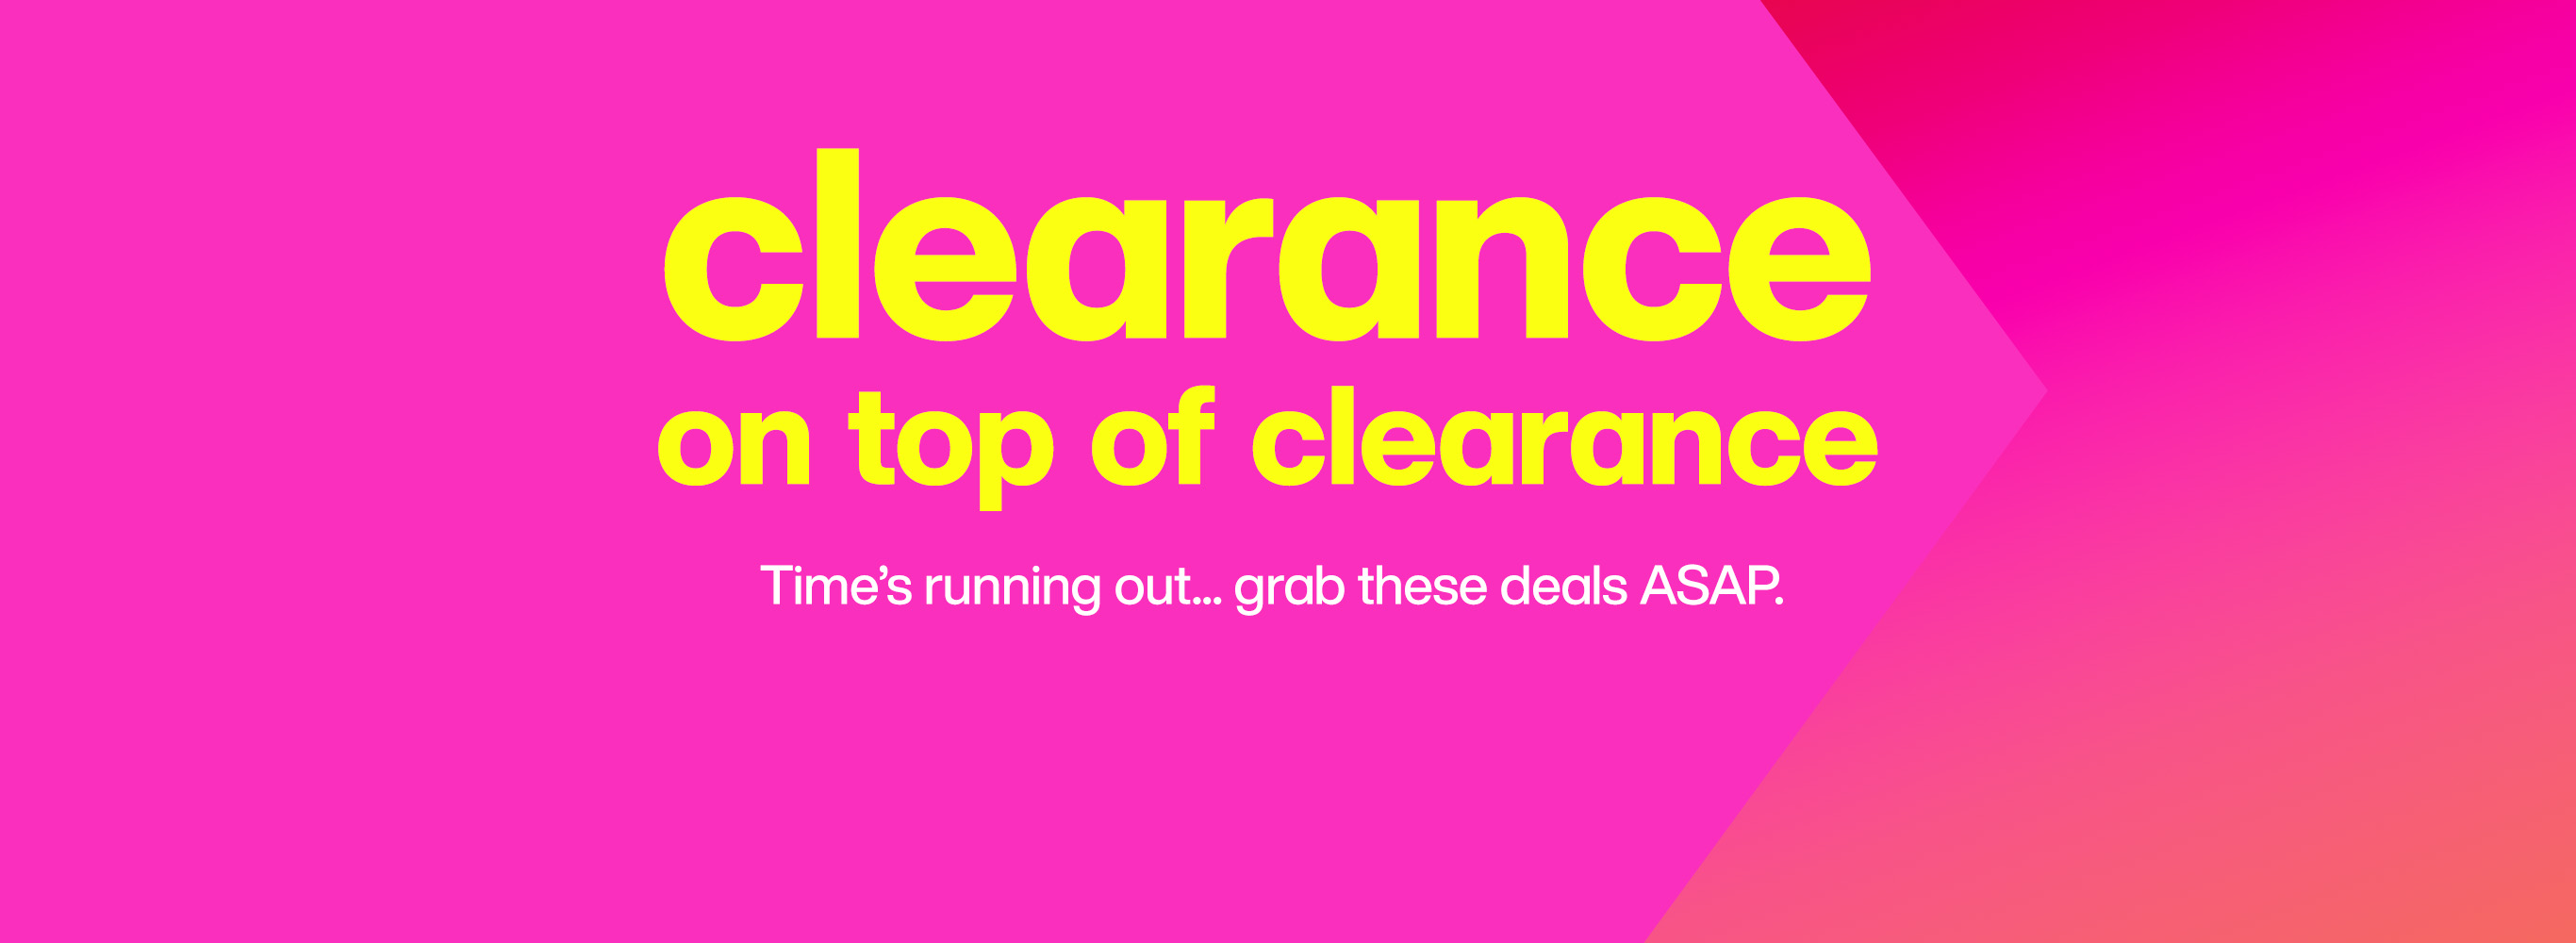 clearance on top of clearance - Time's running out... grab these deals ASAP.